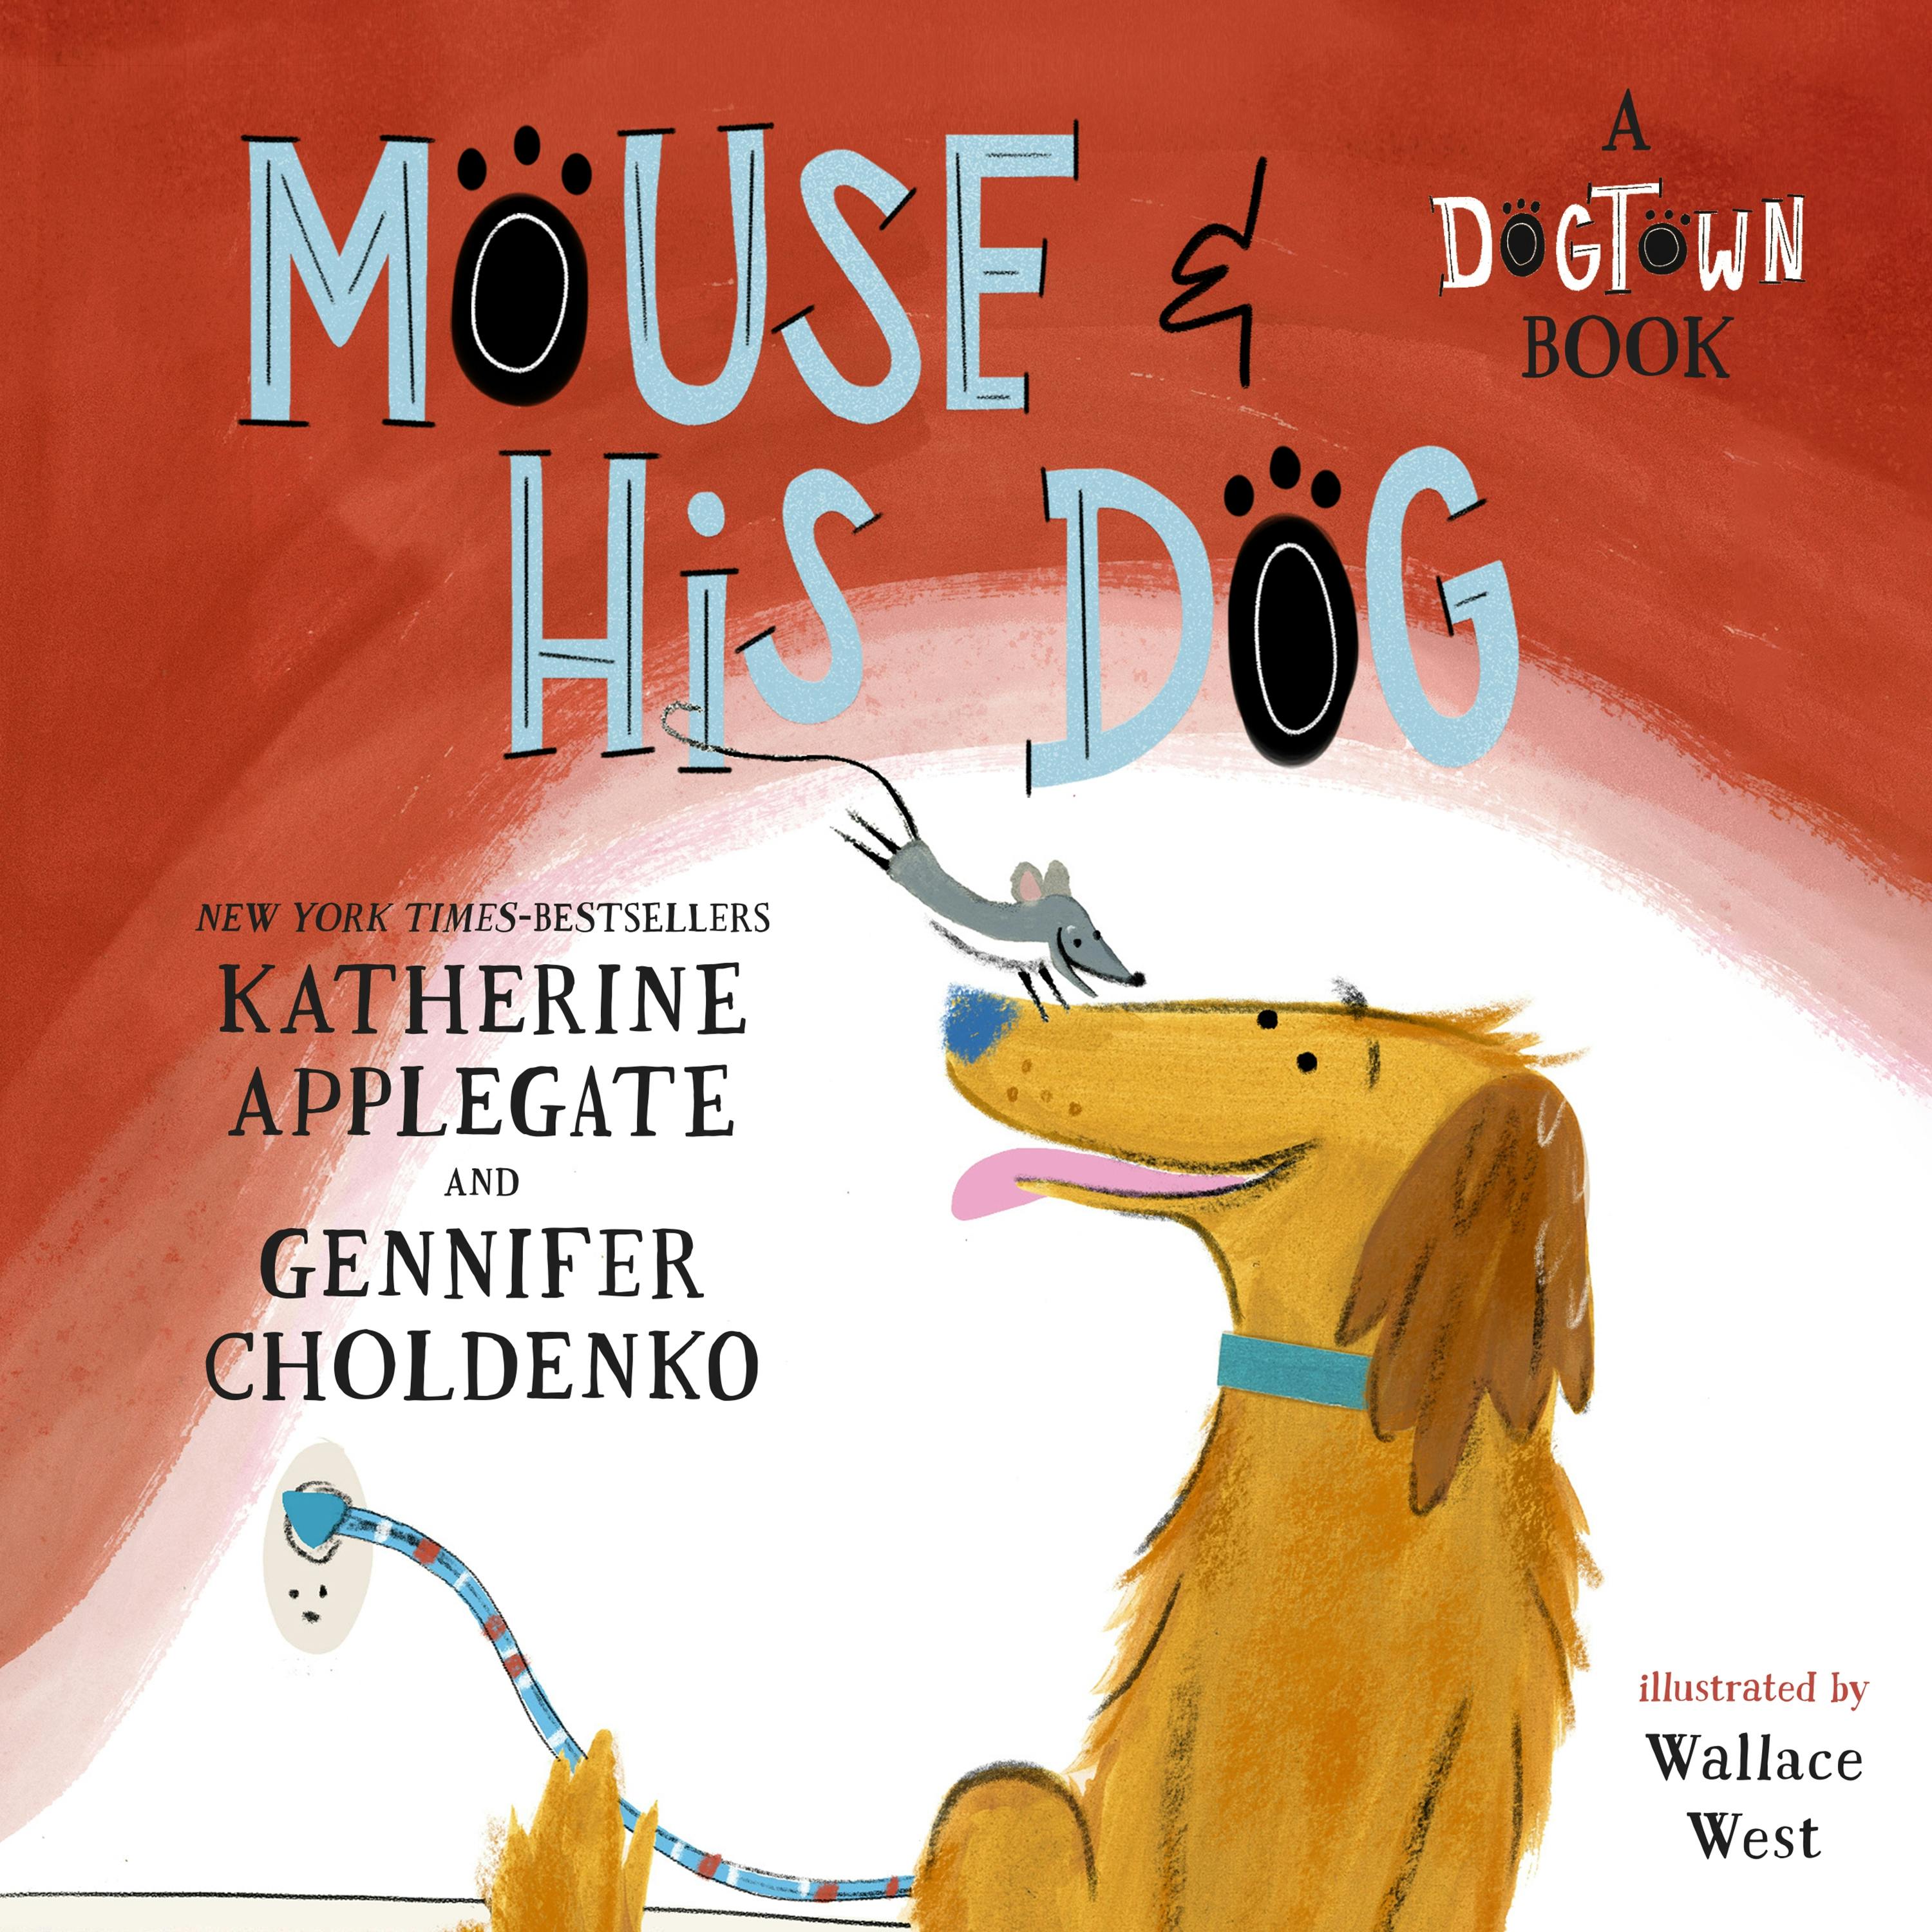 Image of Mouse and His Dog: A Dogtown Book